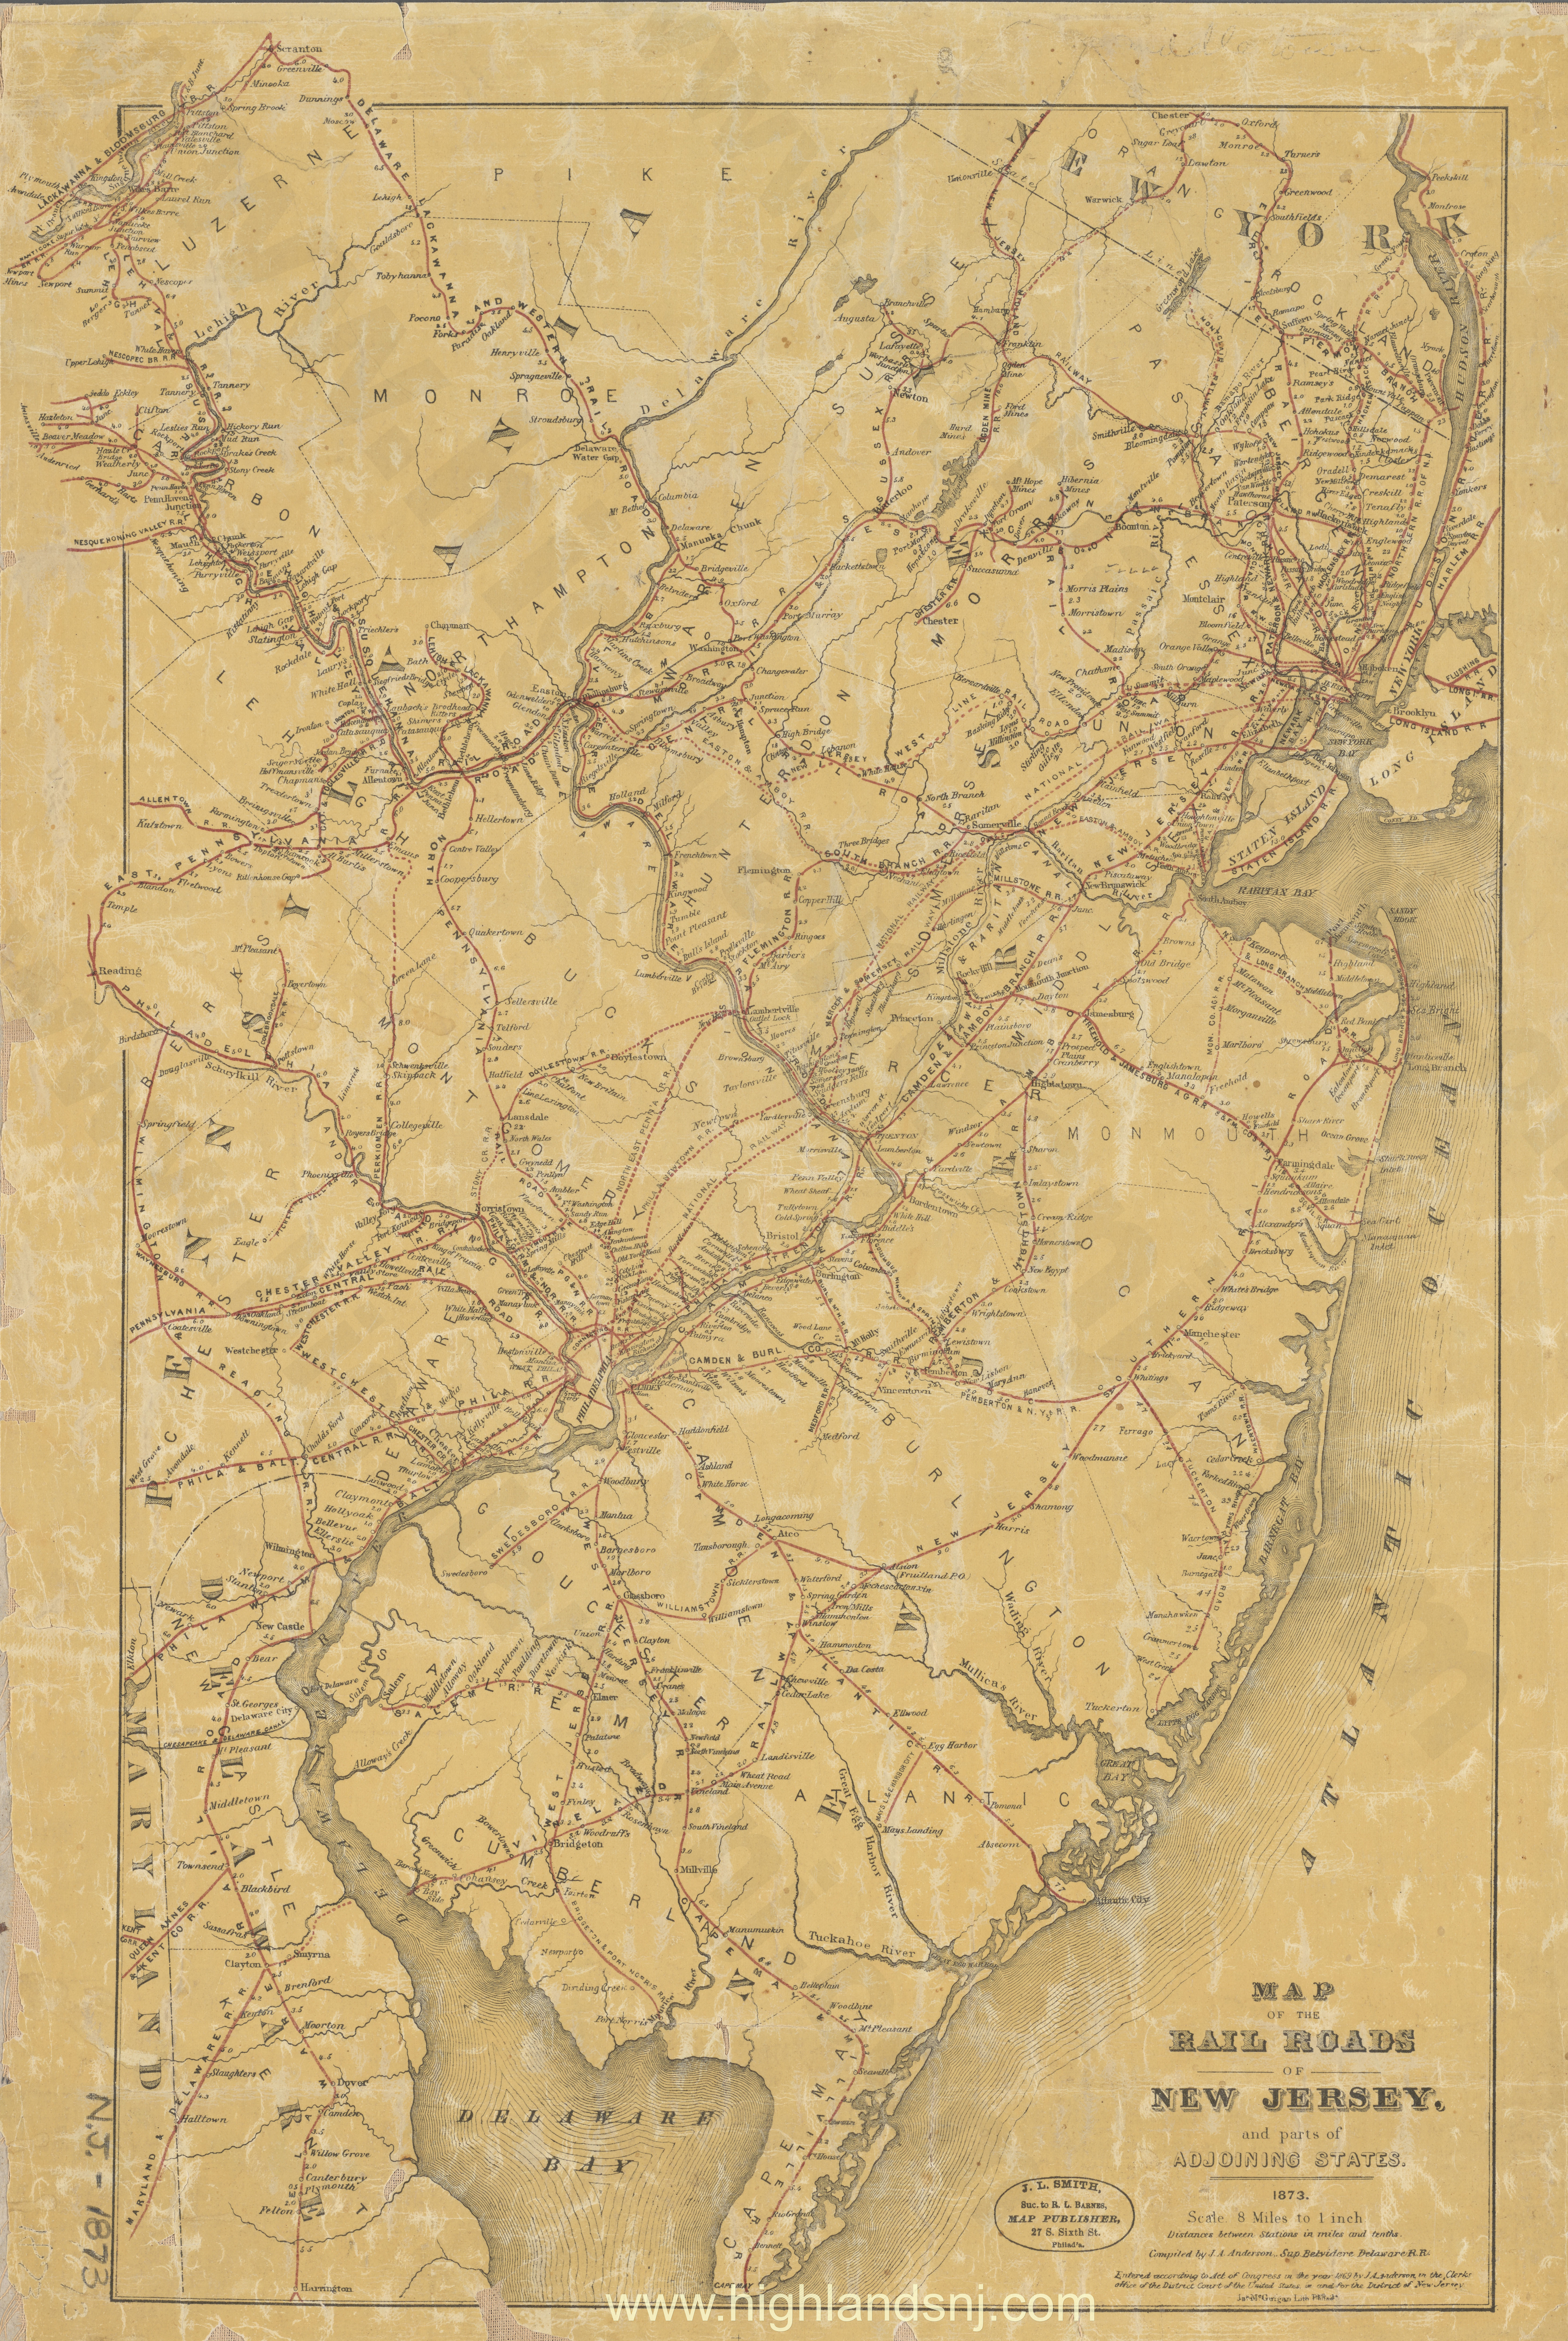 1873 Map of the rail roads of New Jersey